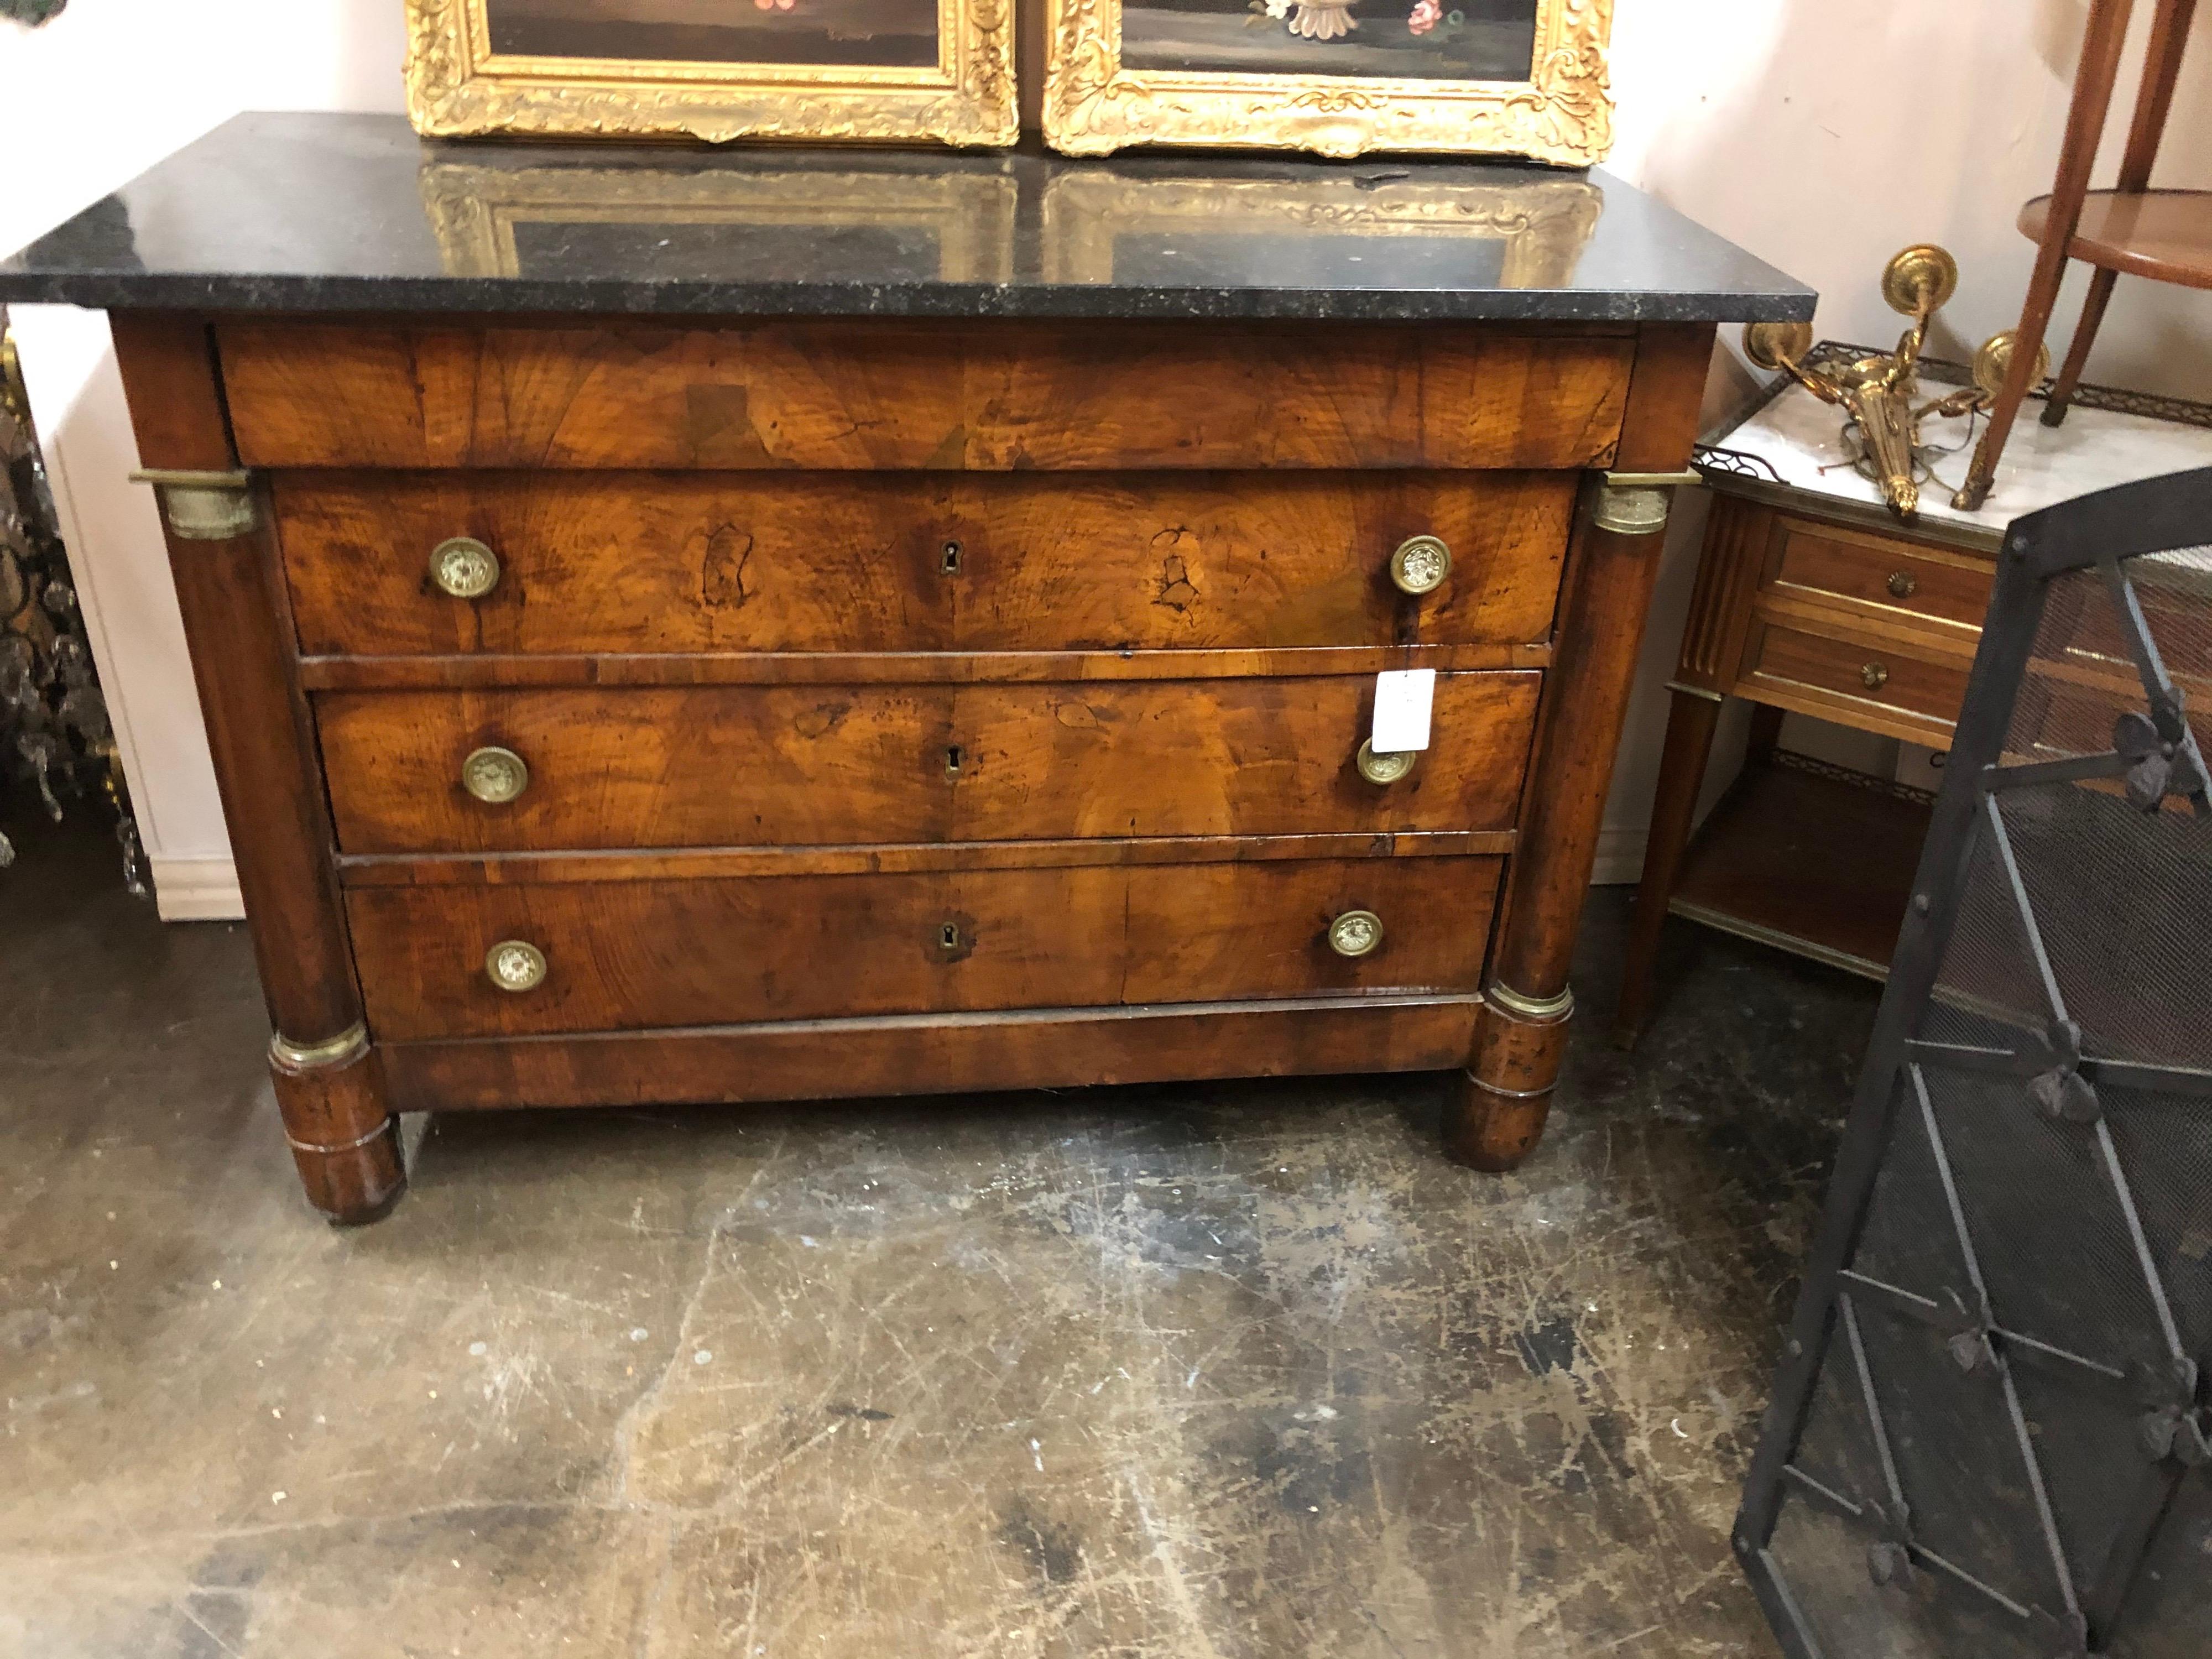 Very fine 19th century French Empire figured walnut commode. The black marble top above three beautifully patinated drawers with brass pulls and flanked by turned columns with brass accents.

Period piece,

circa 1850.

Perfect for traditional